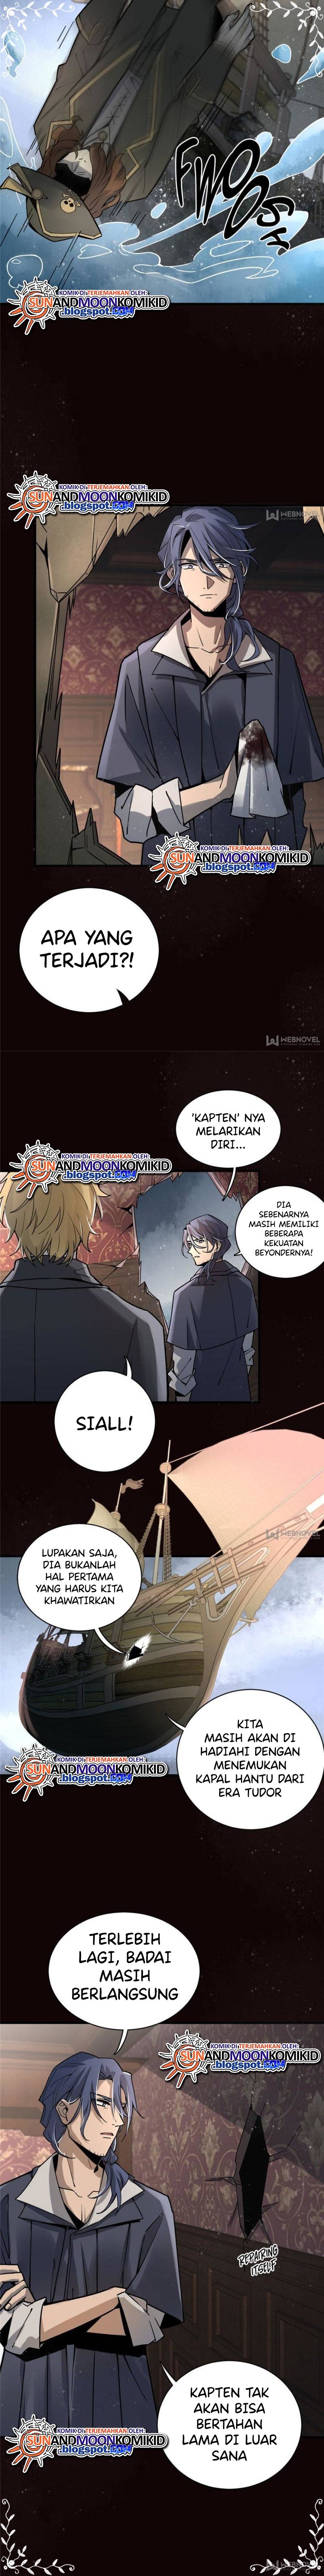 Lord Of The Mysteries Chapter 08 - 69